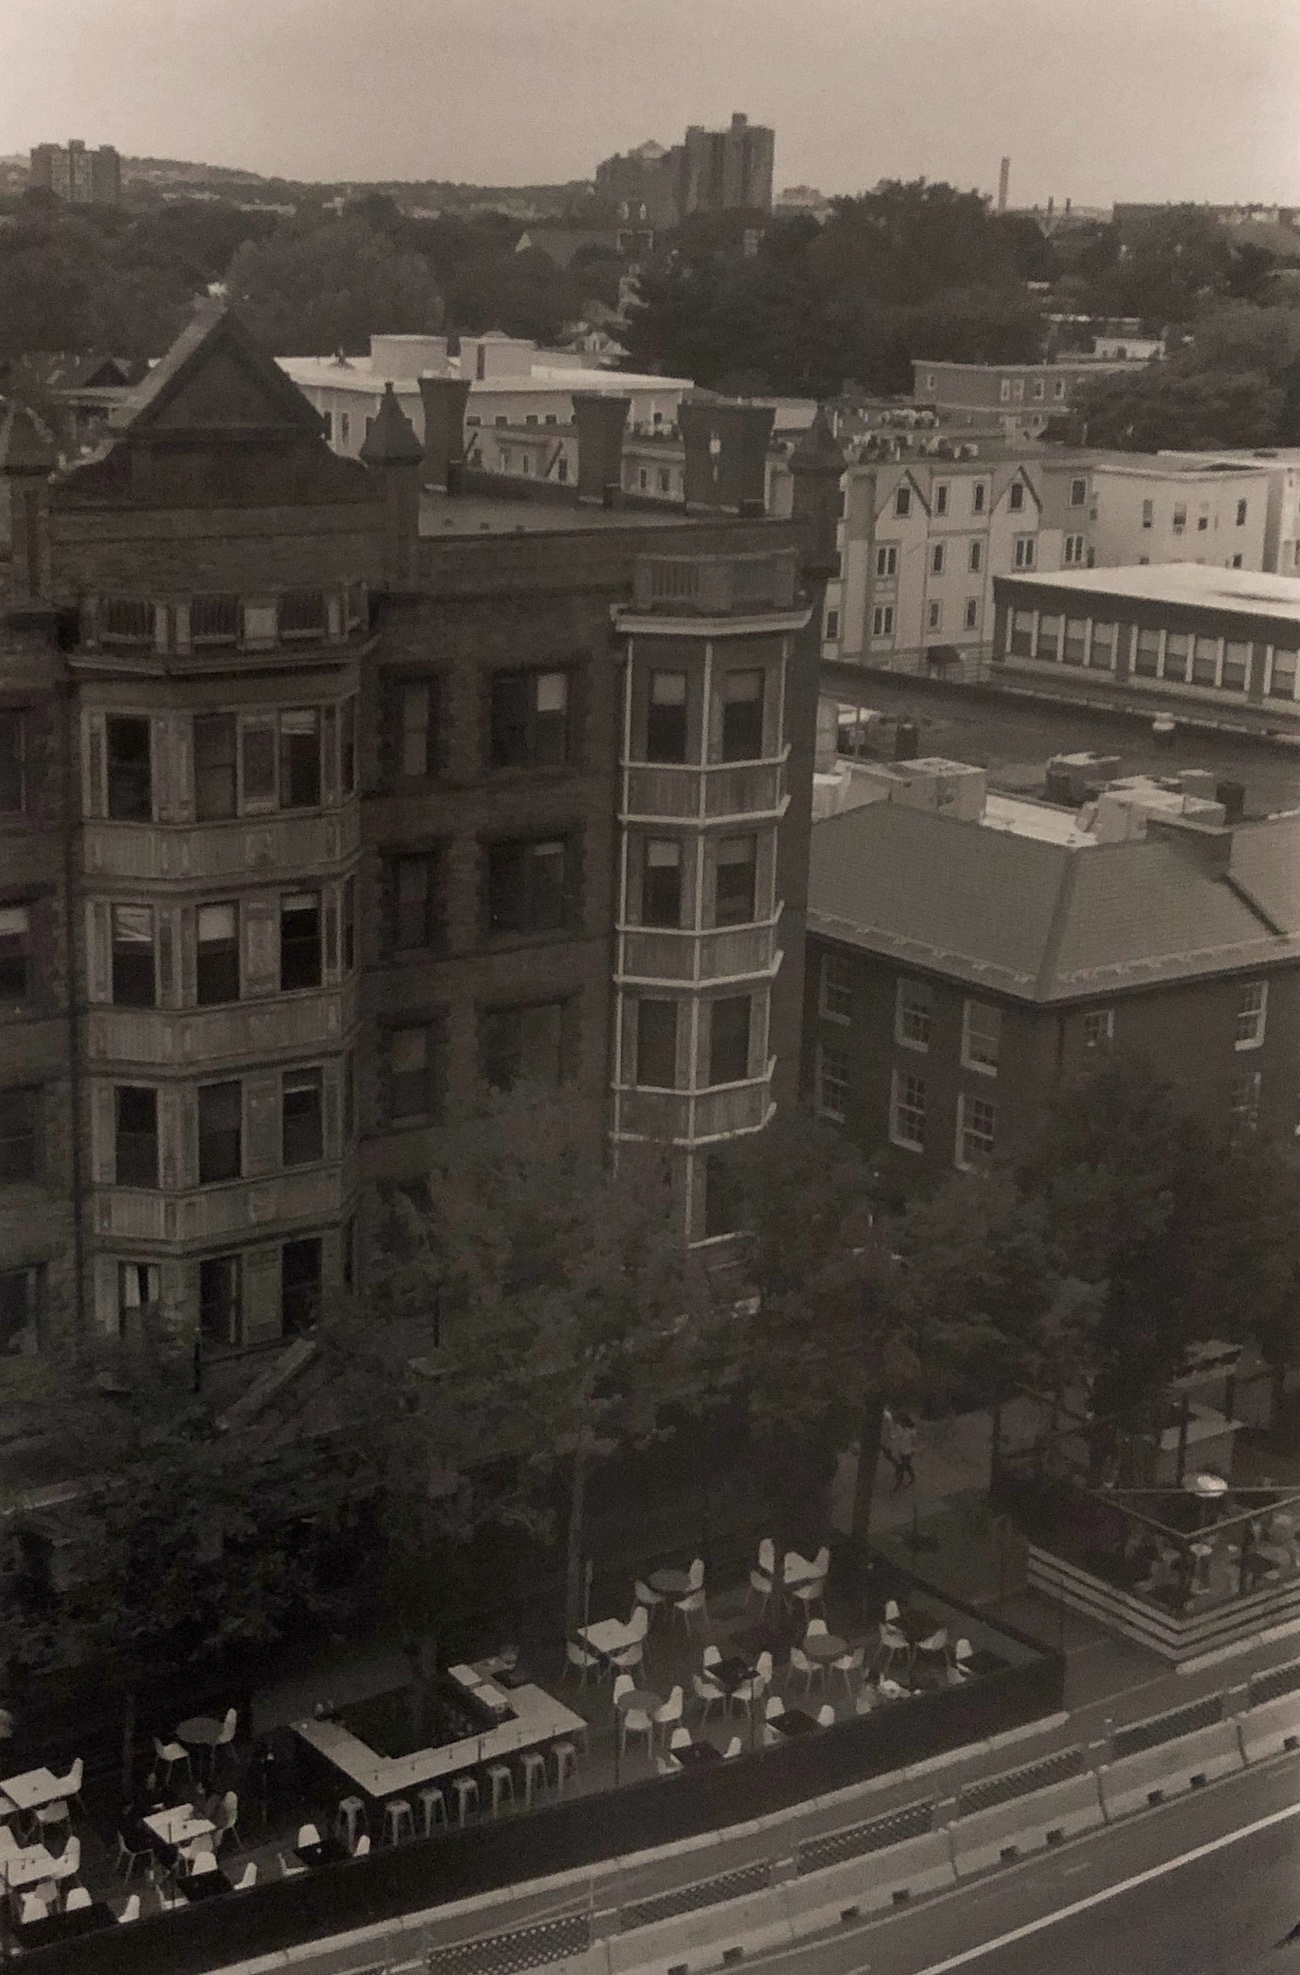 Black and white film photo of Mass Ave from above. Time seems to stand still.